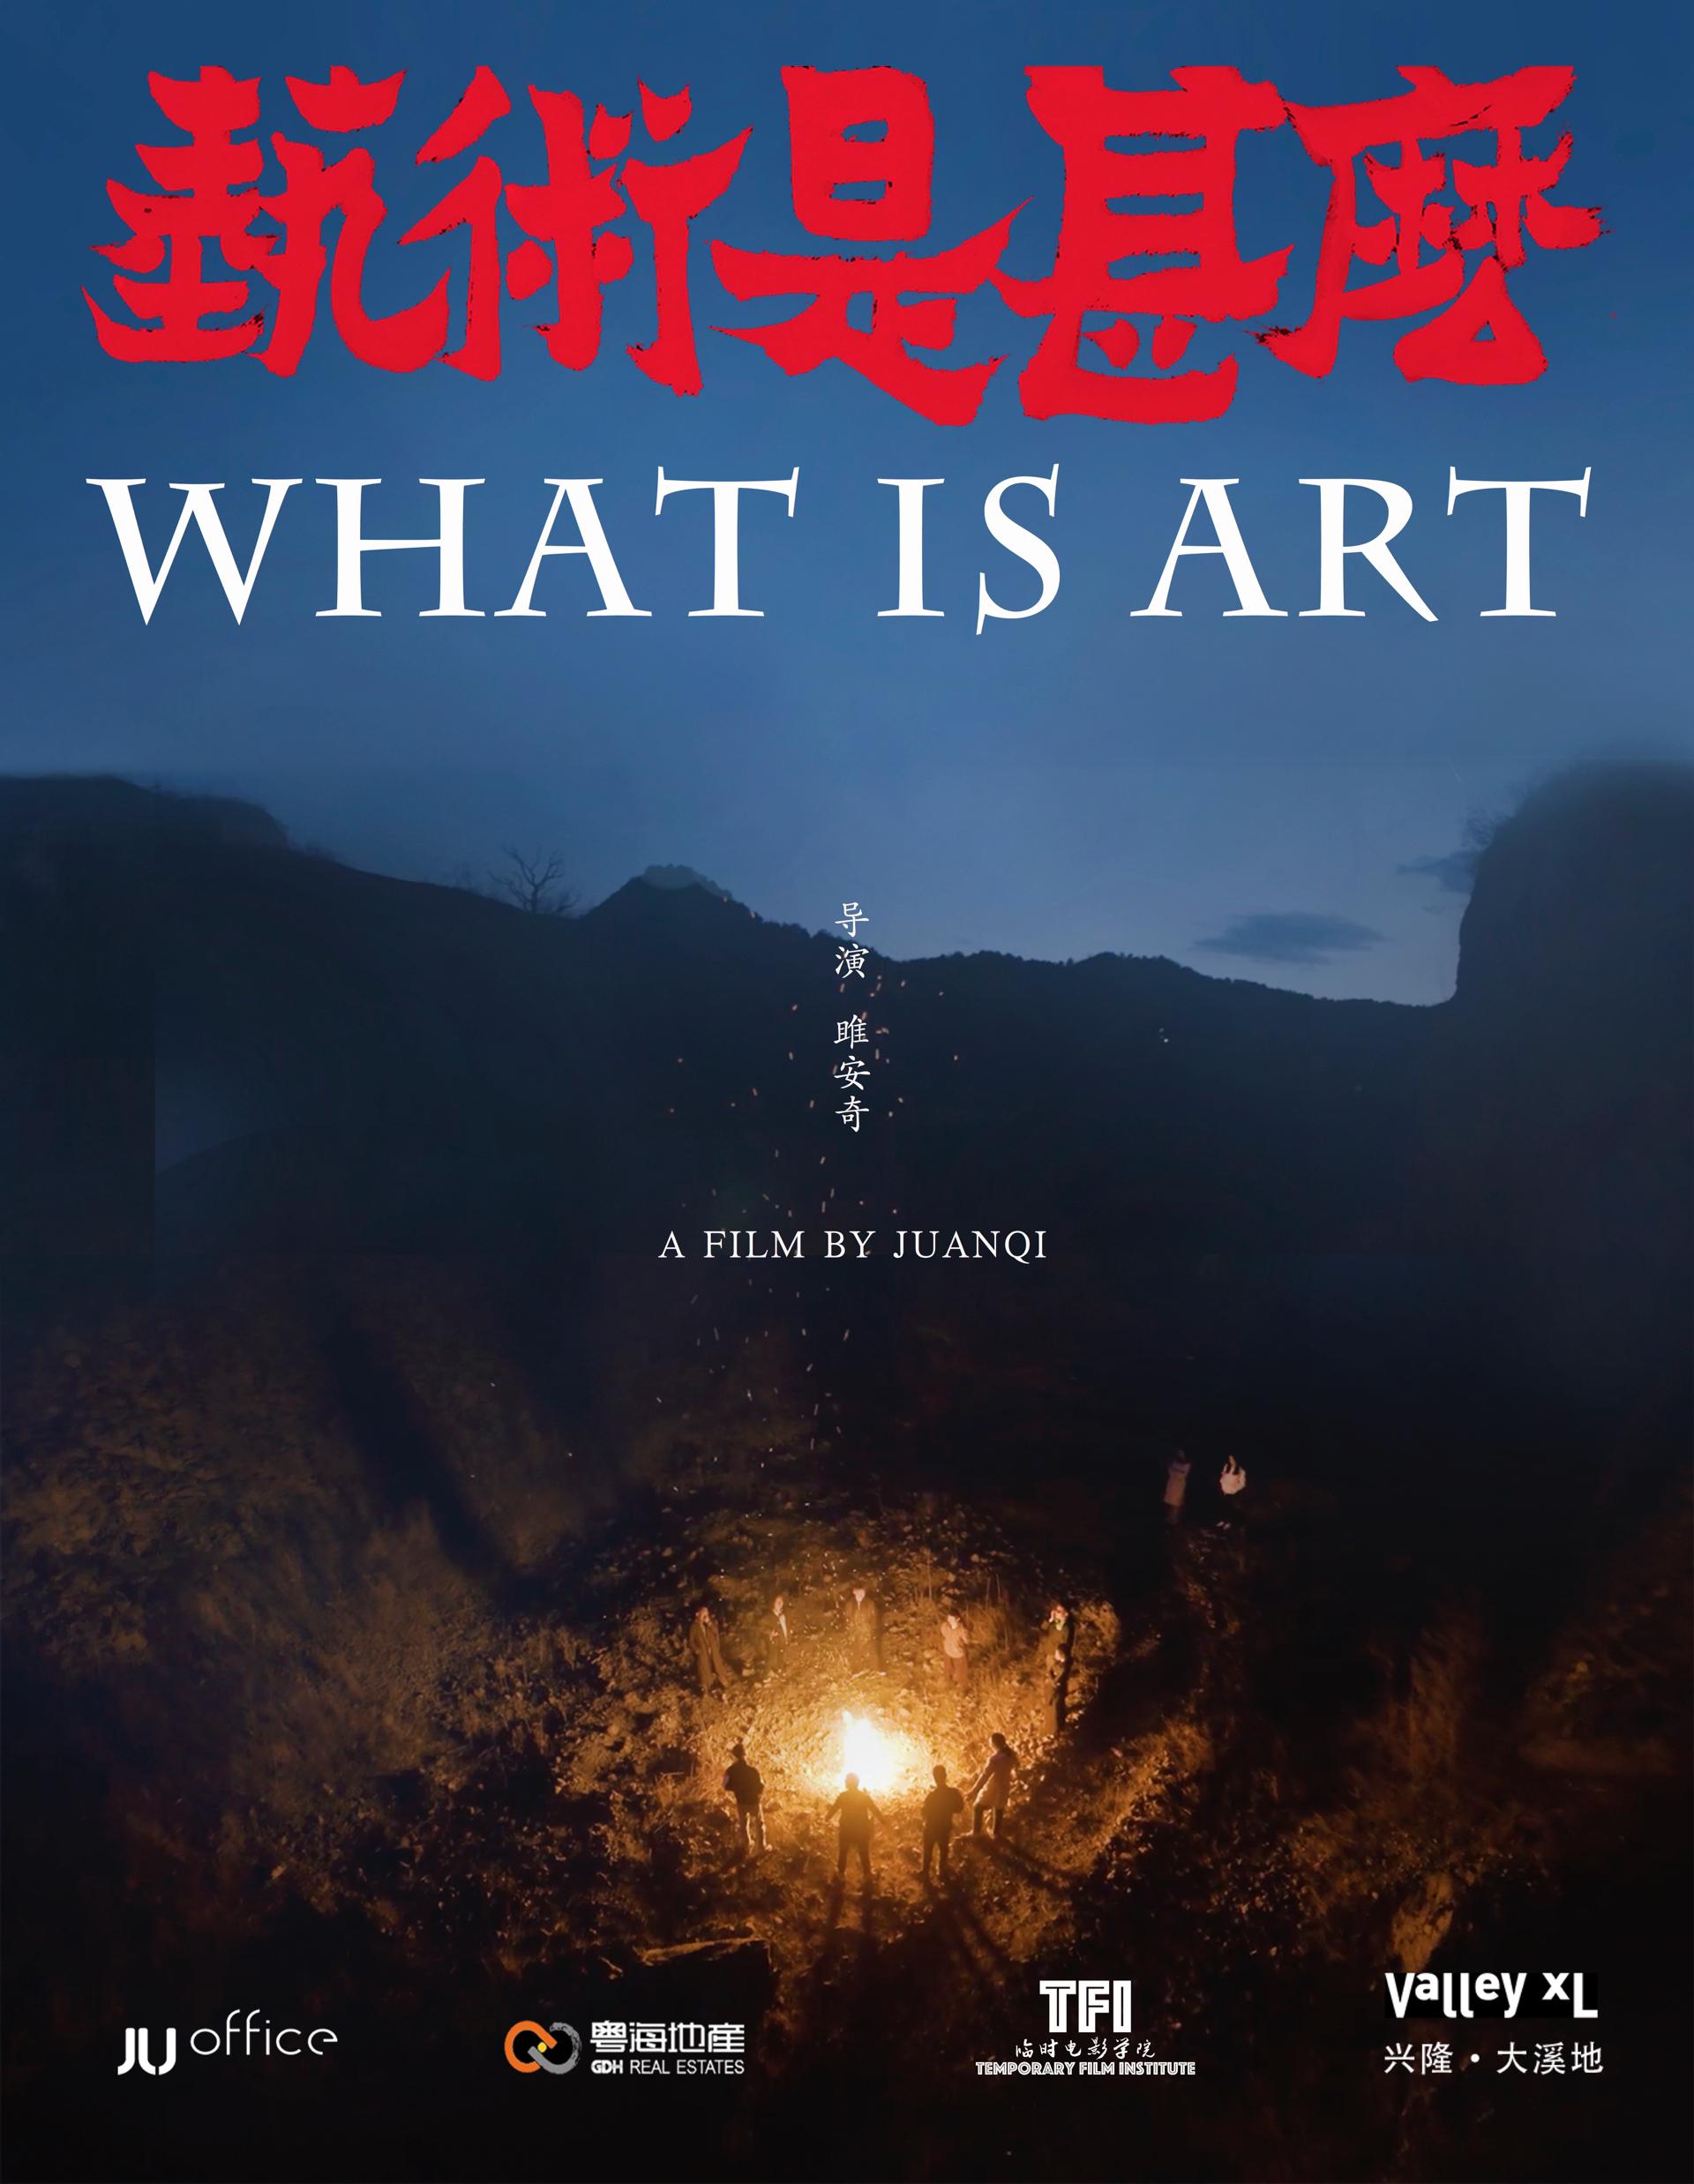 WHAT IS ART？